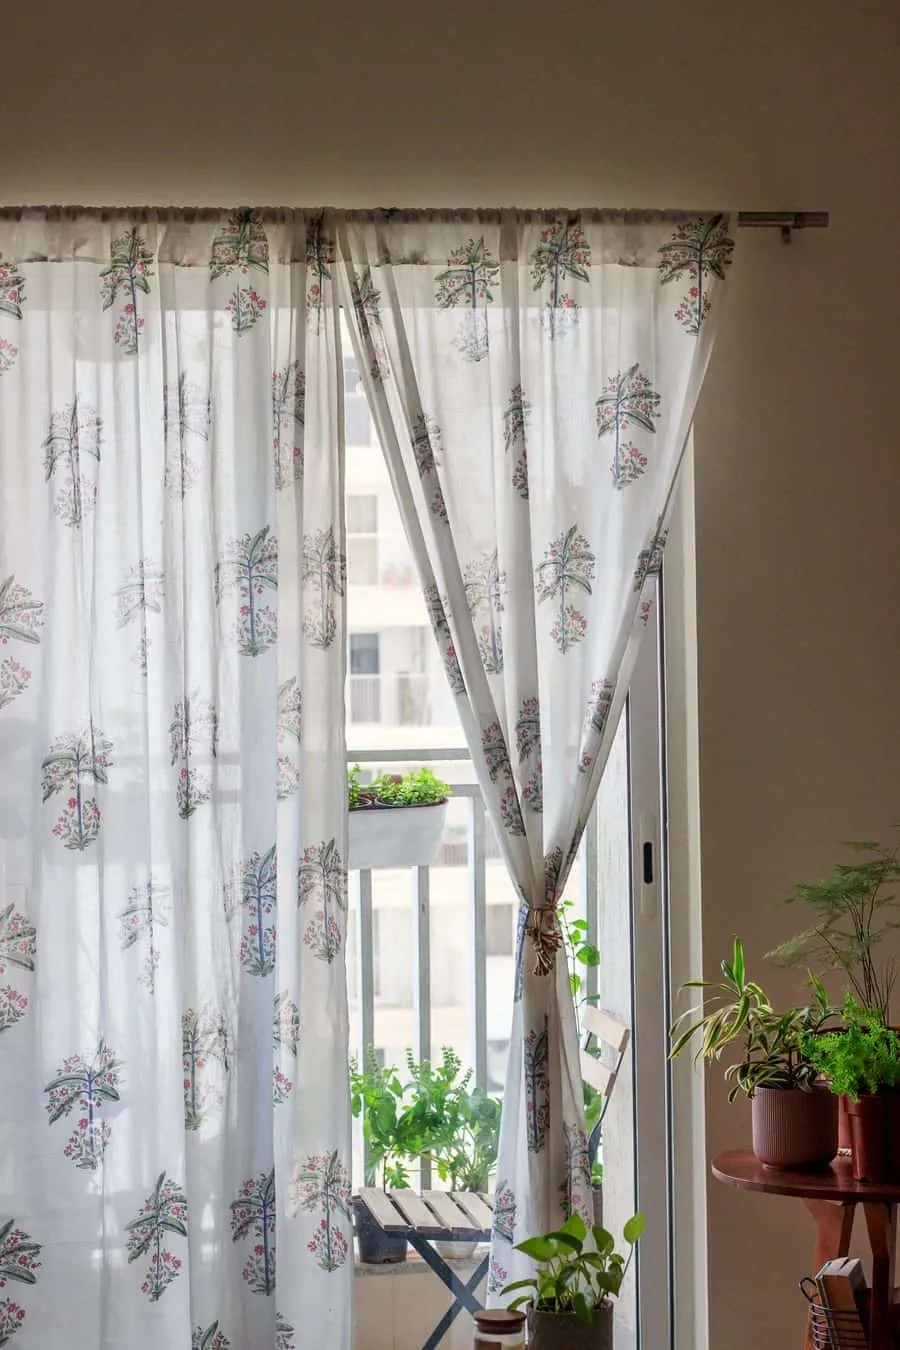 Printed white curtains with plants decor